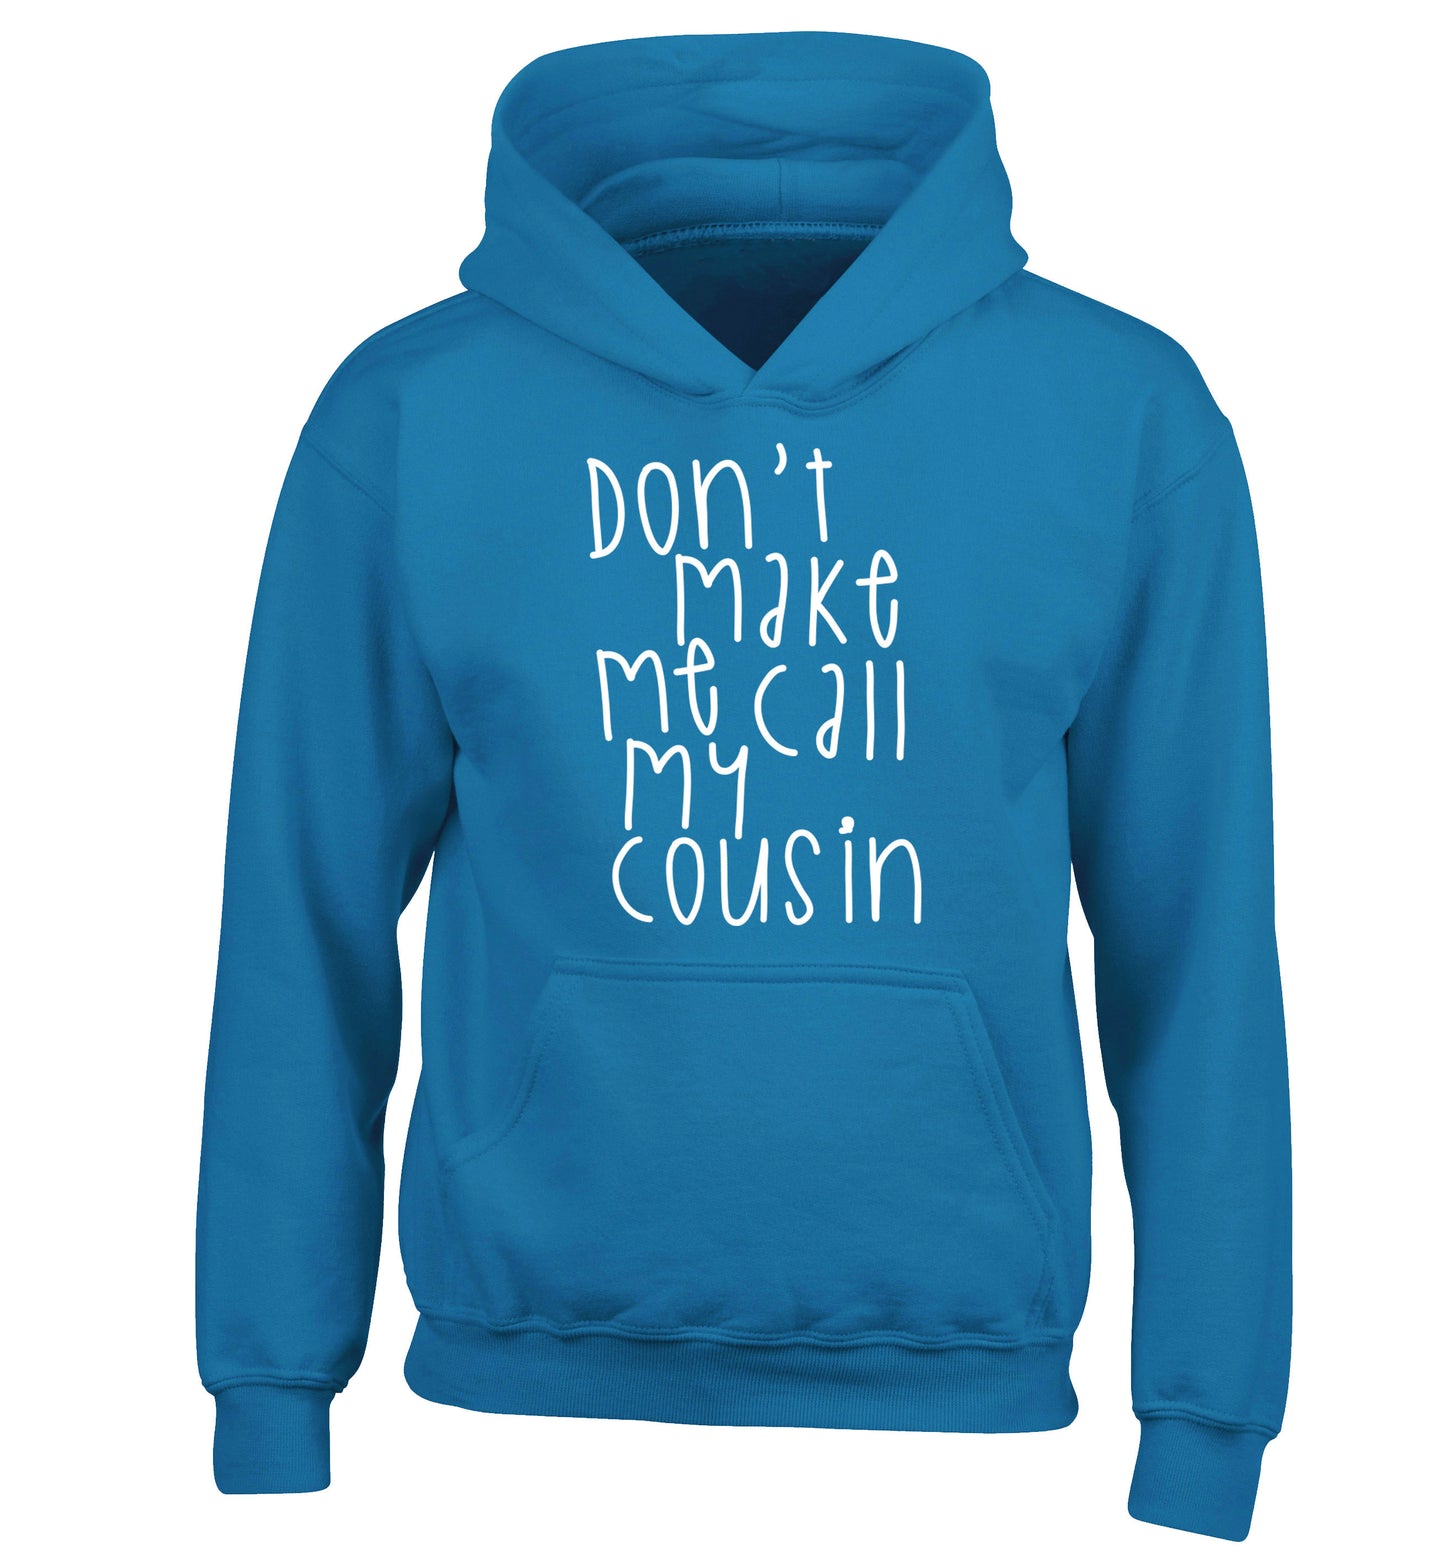 Don't make me call my cousin children's blue hoodie 12-14 Years